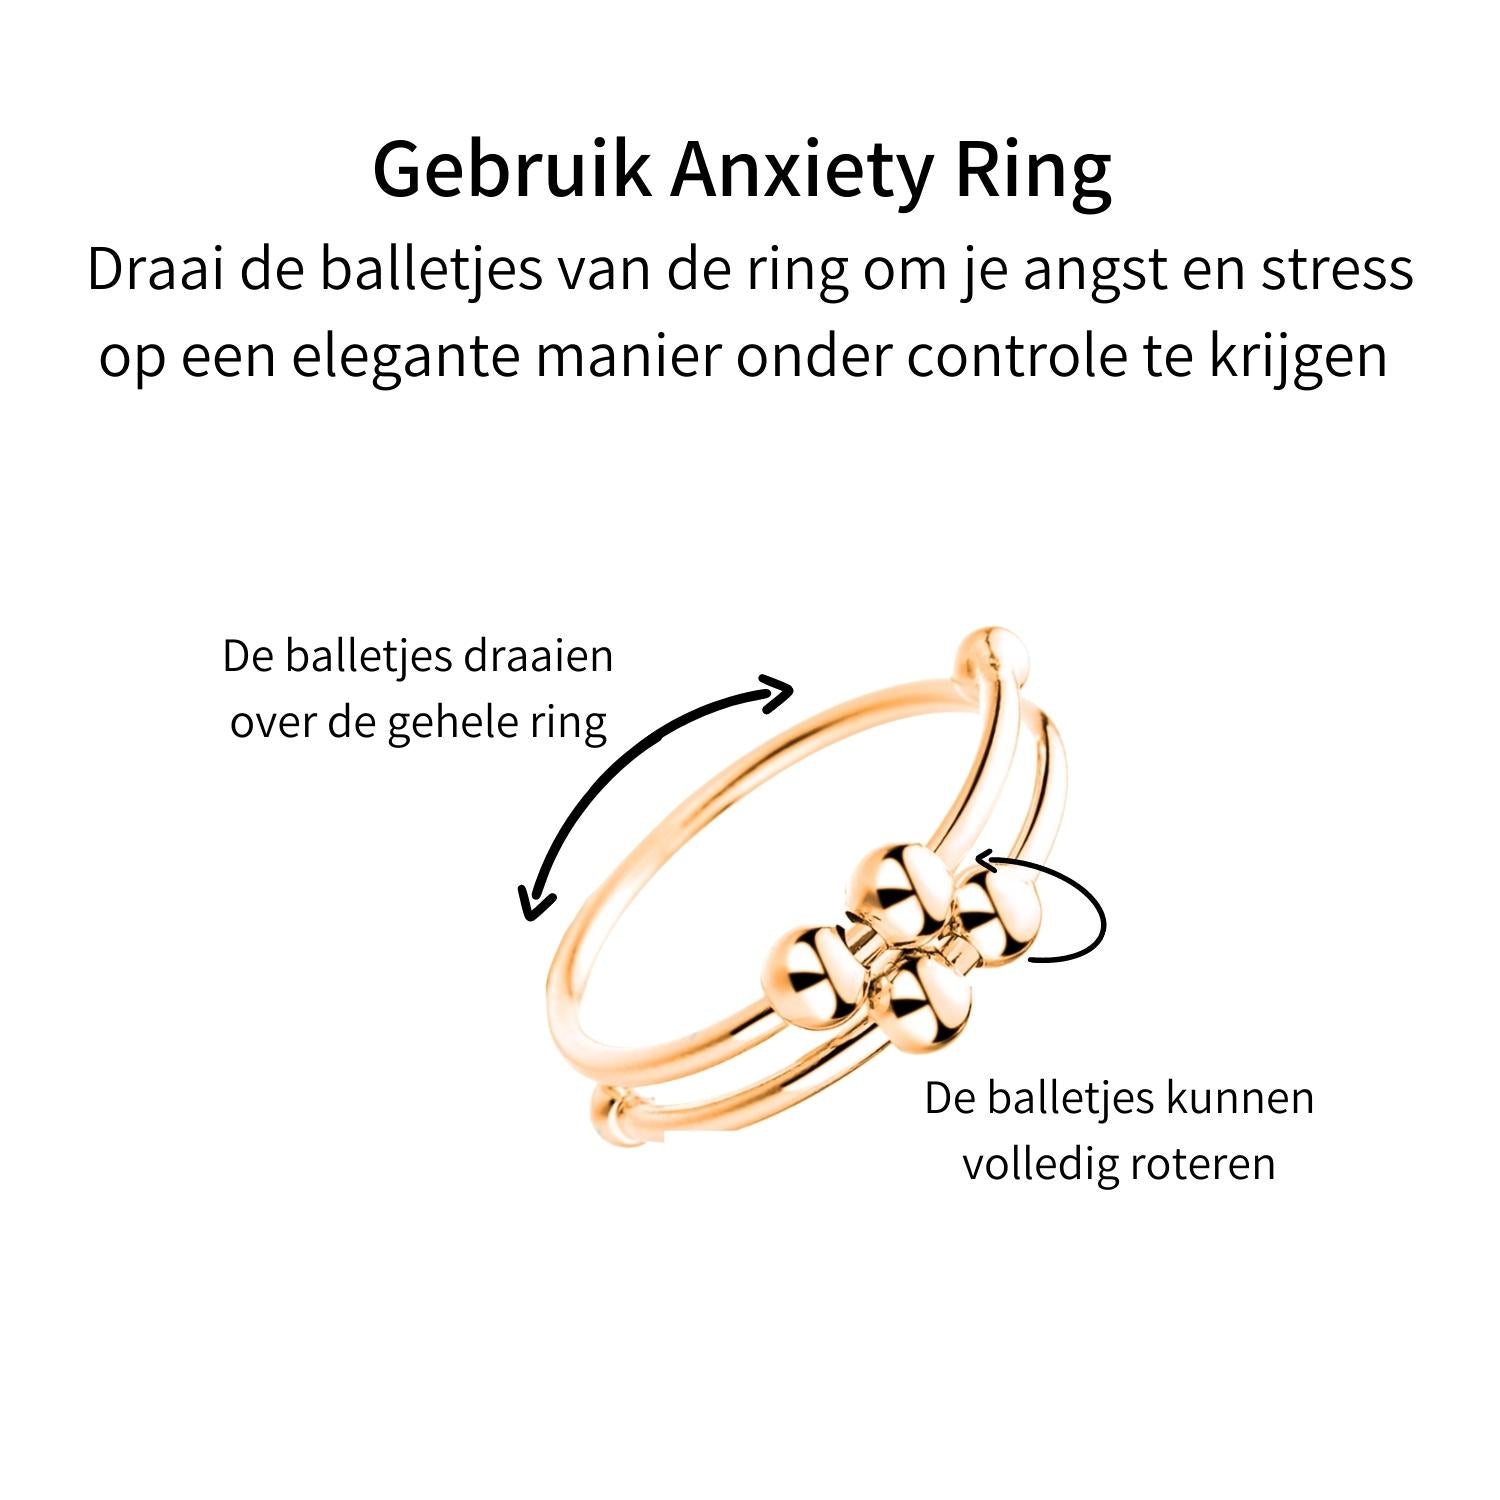 Anxiety Ring (dubbel) zilver 925 gold plated gebruik